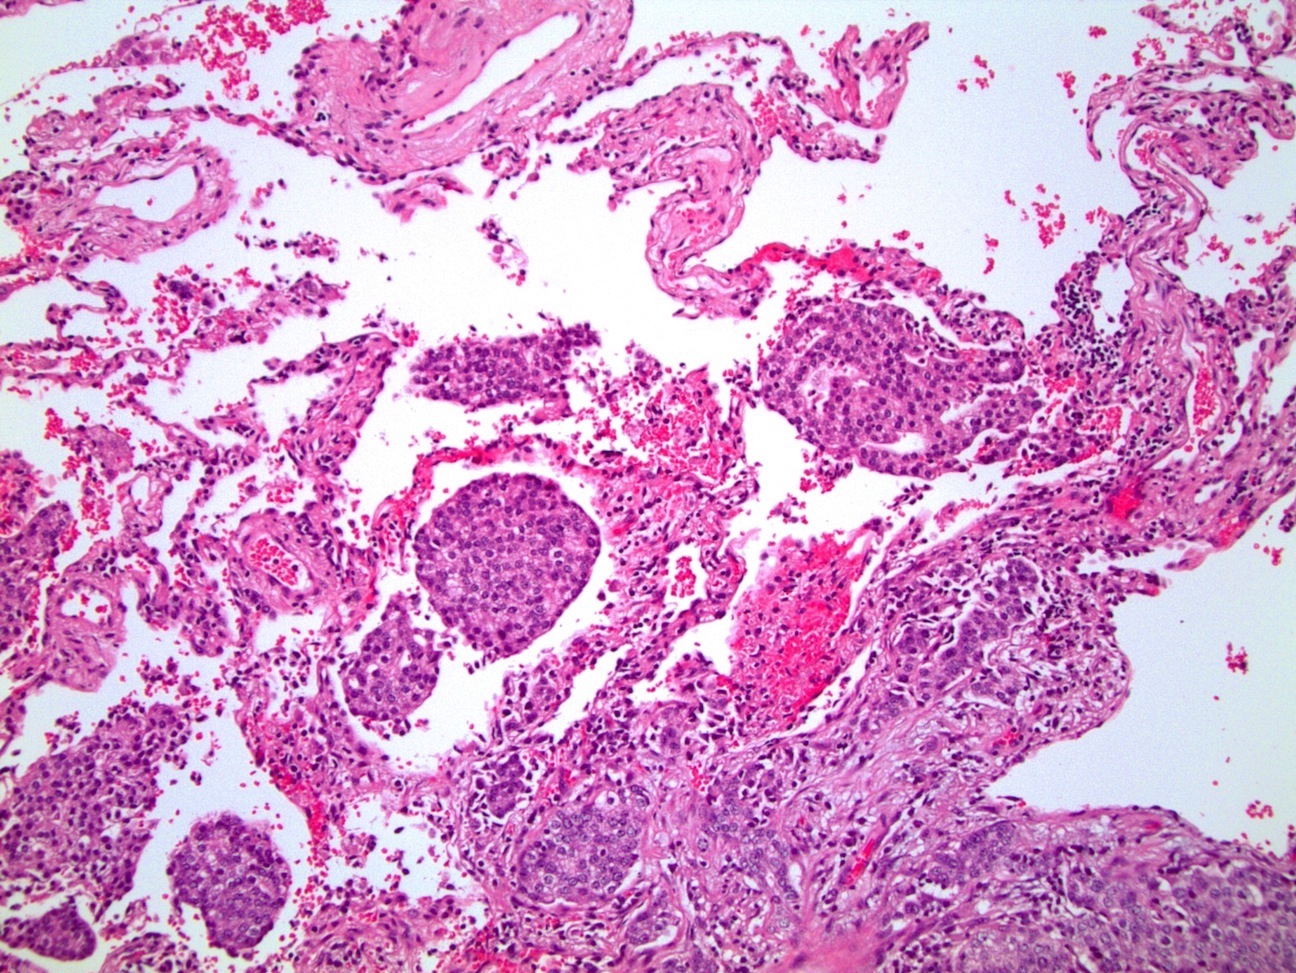 Prostatic<br>adenocarcinoma<br>metastatic to lung